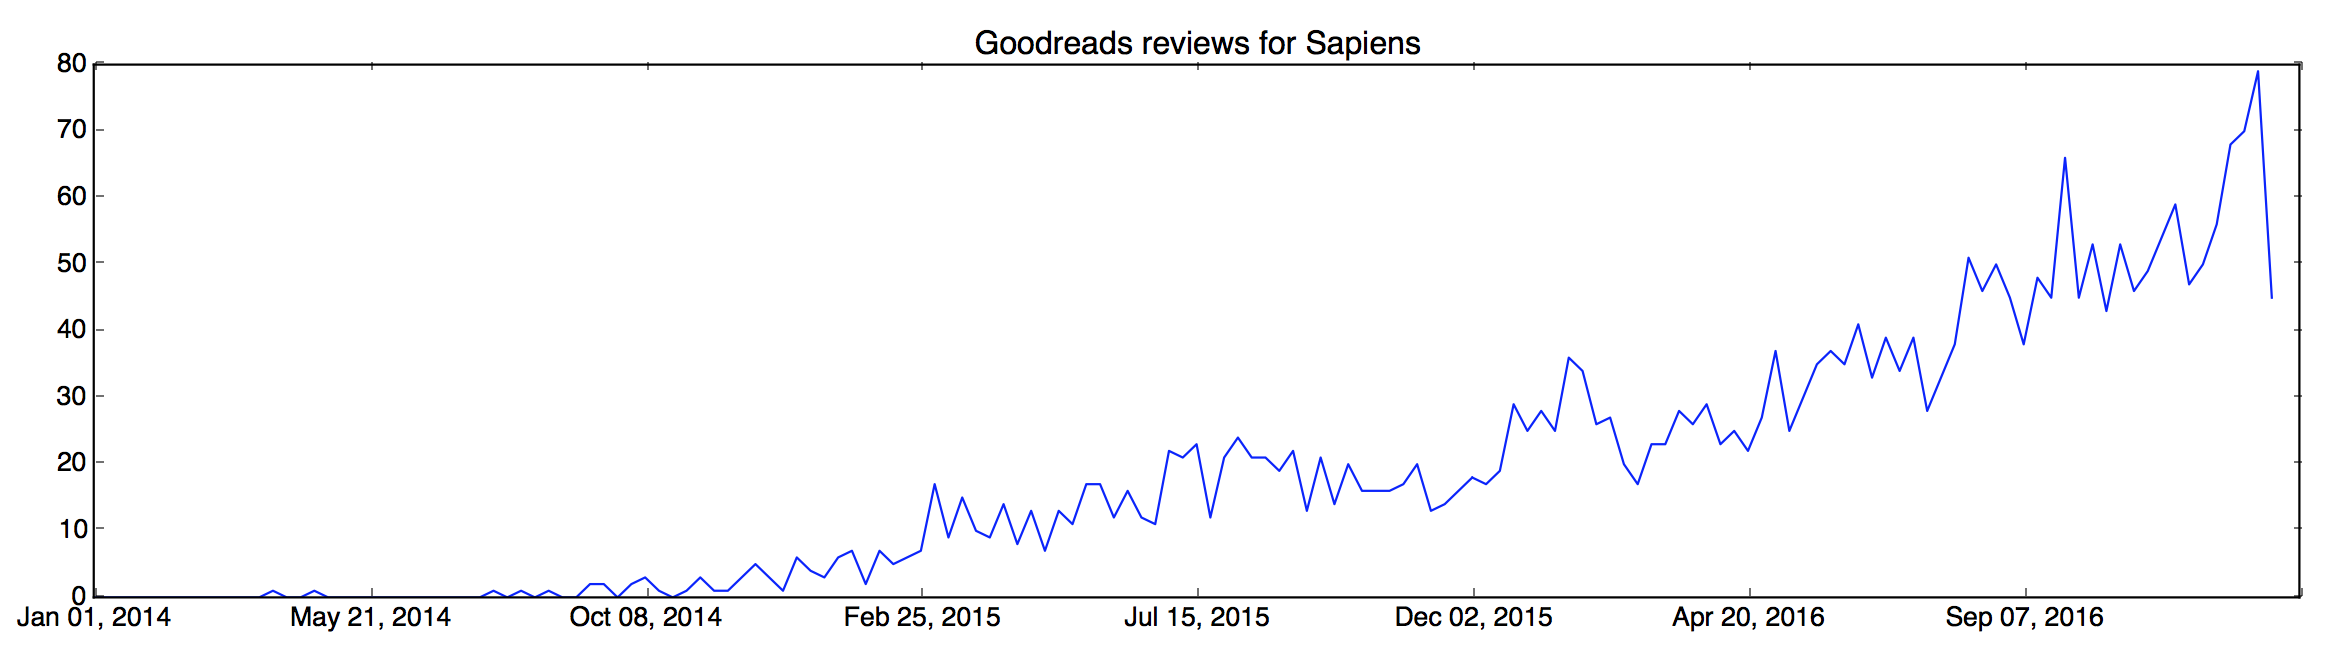 Goodreads reviews for Sapiens from January 1, 2014